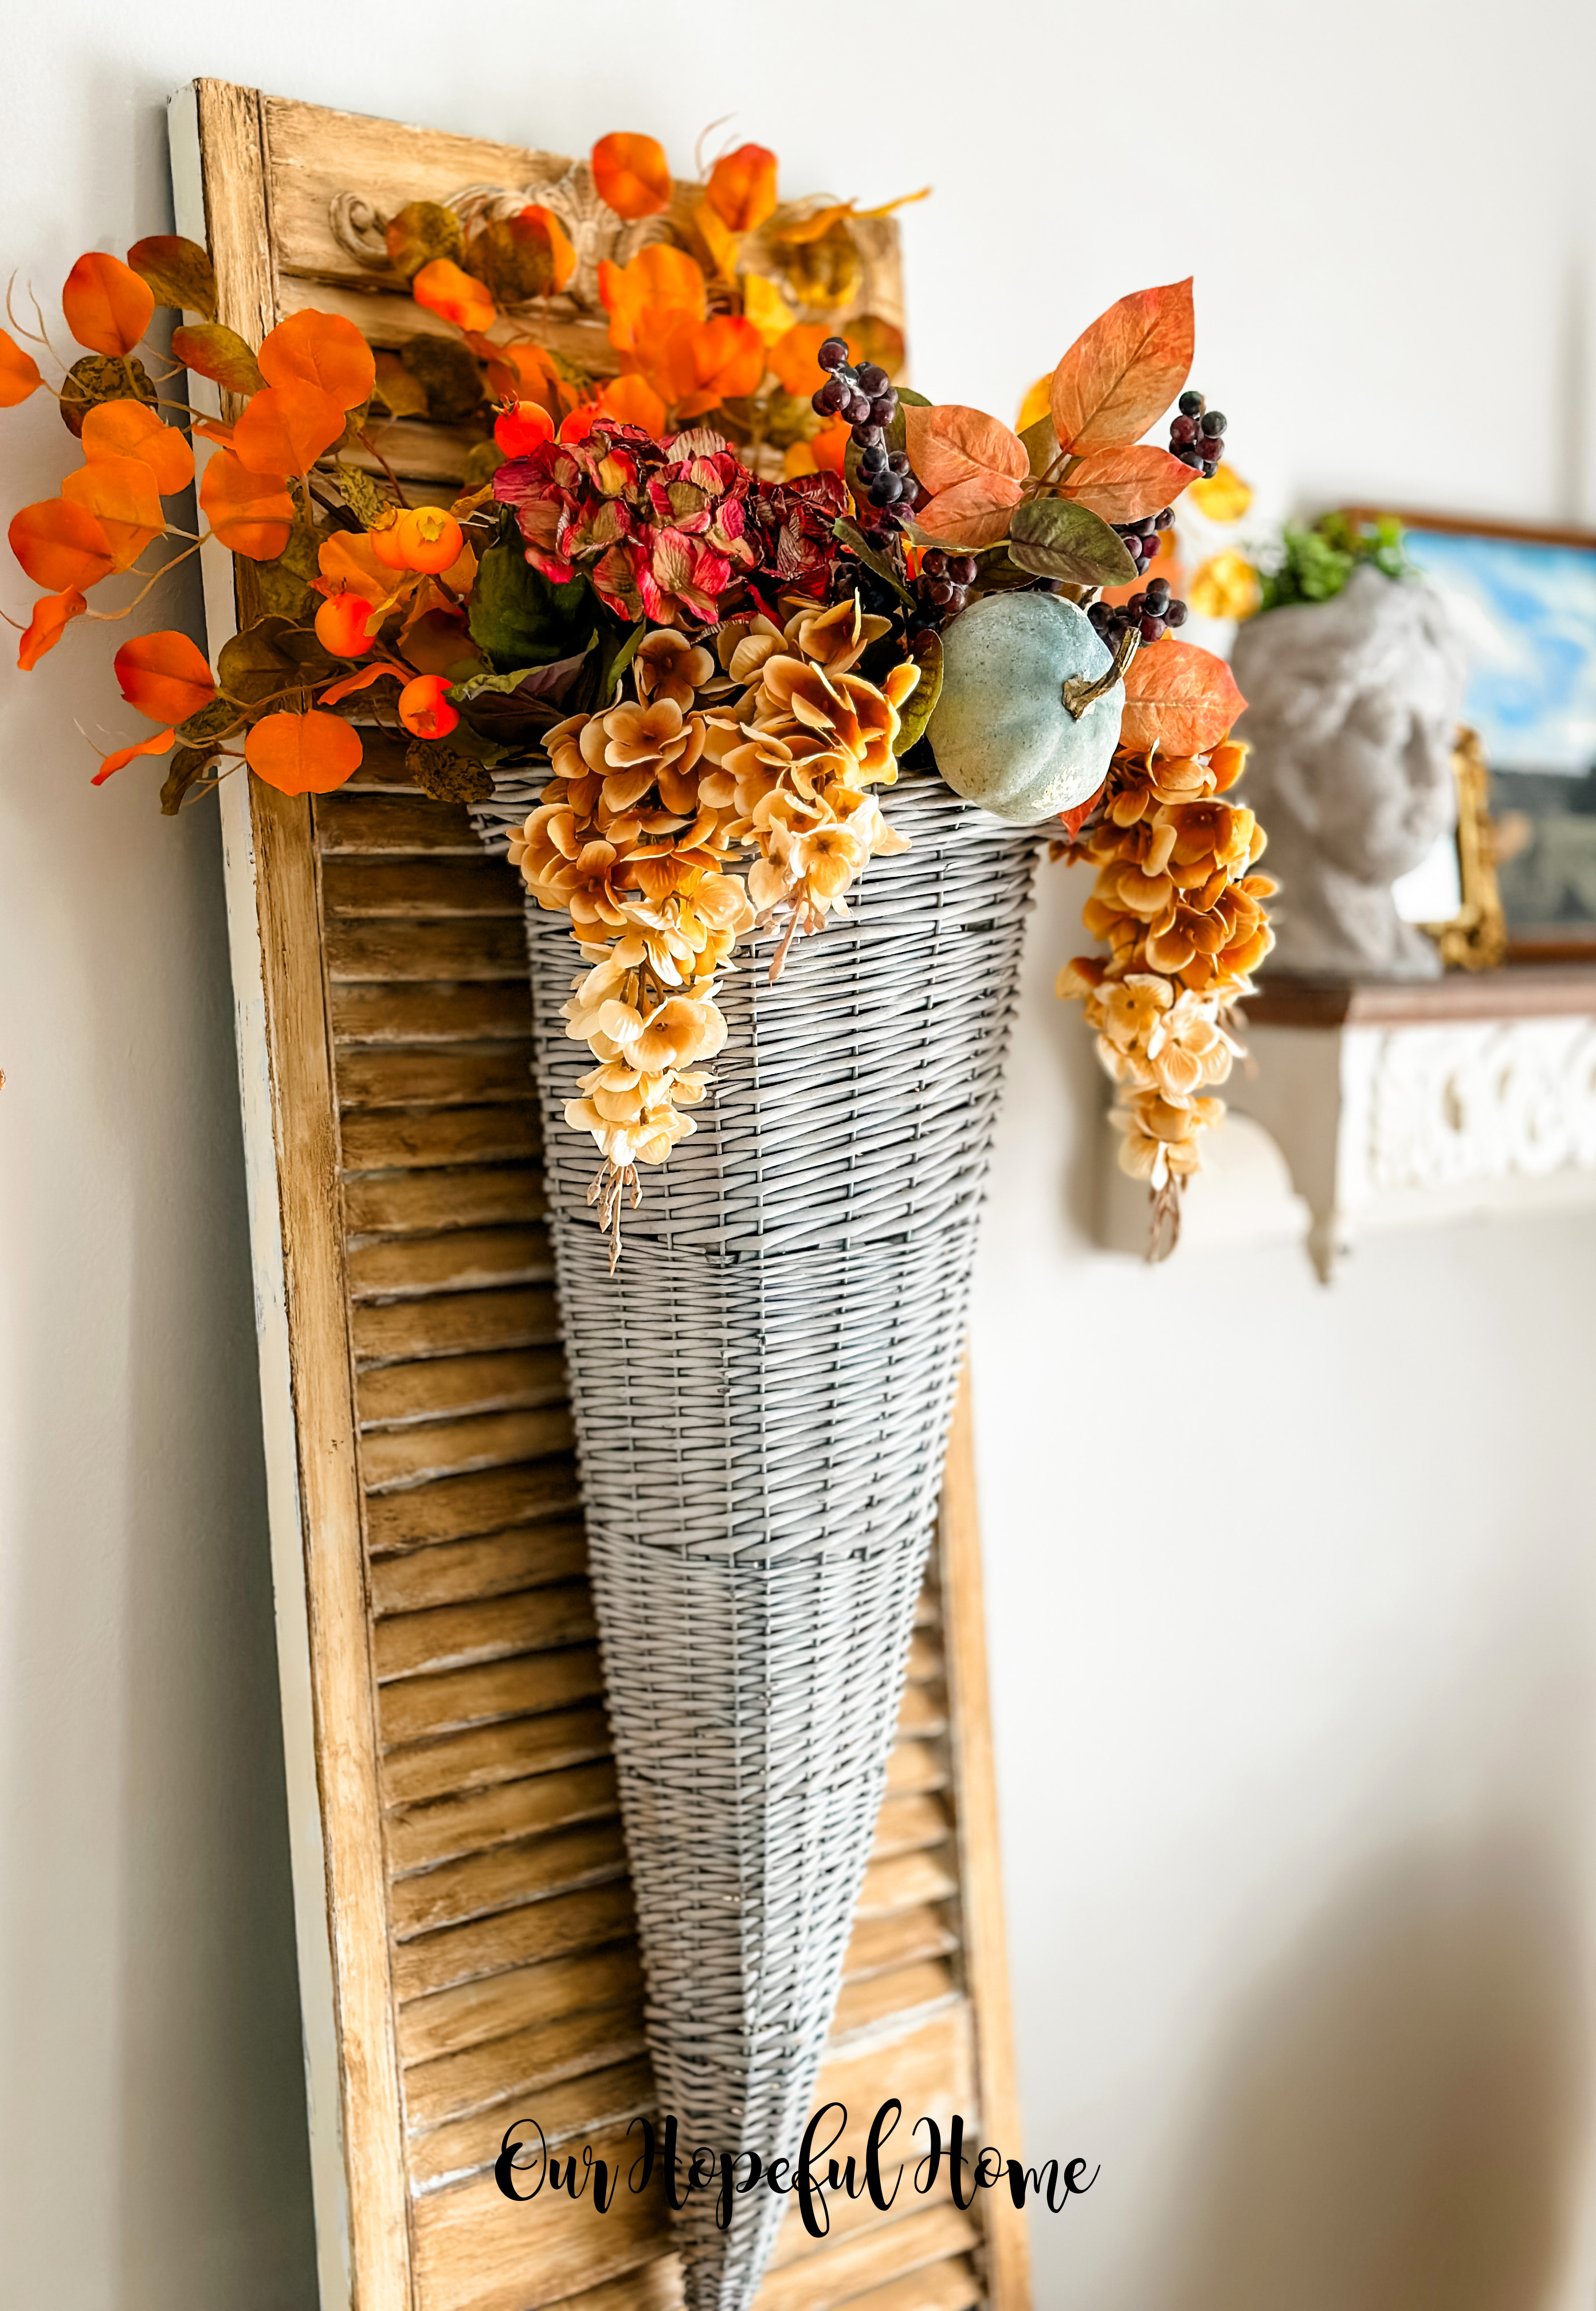 How to Make Cone Shaped Floral Arrangements